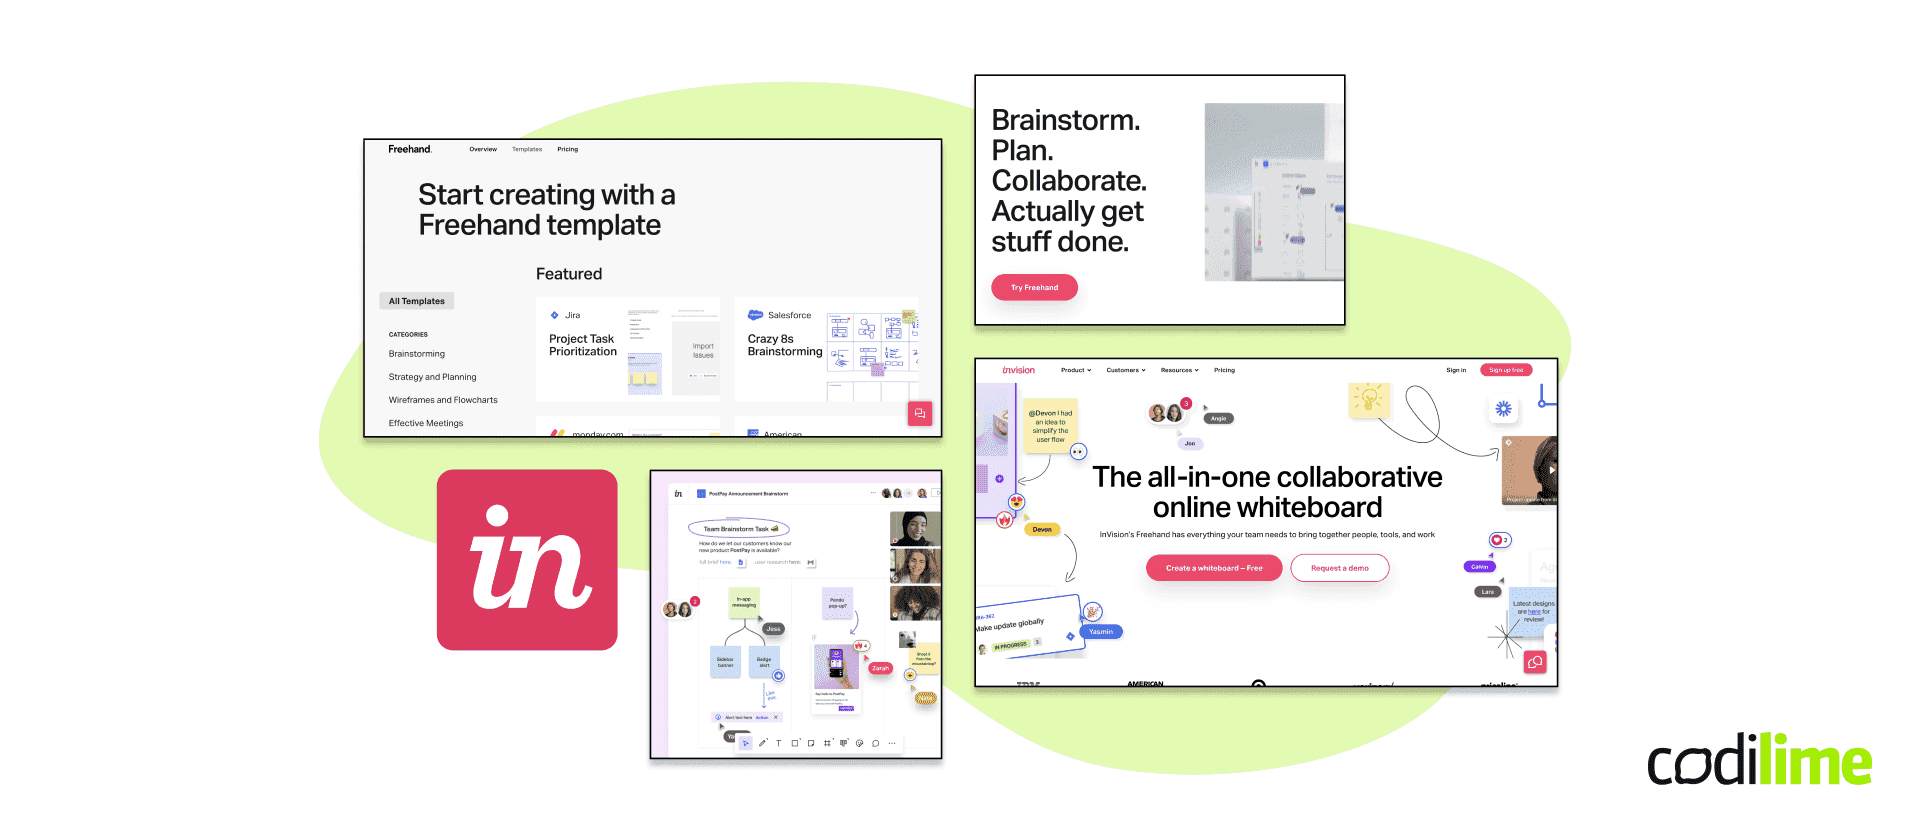  Tools for prototyping - InVision